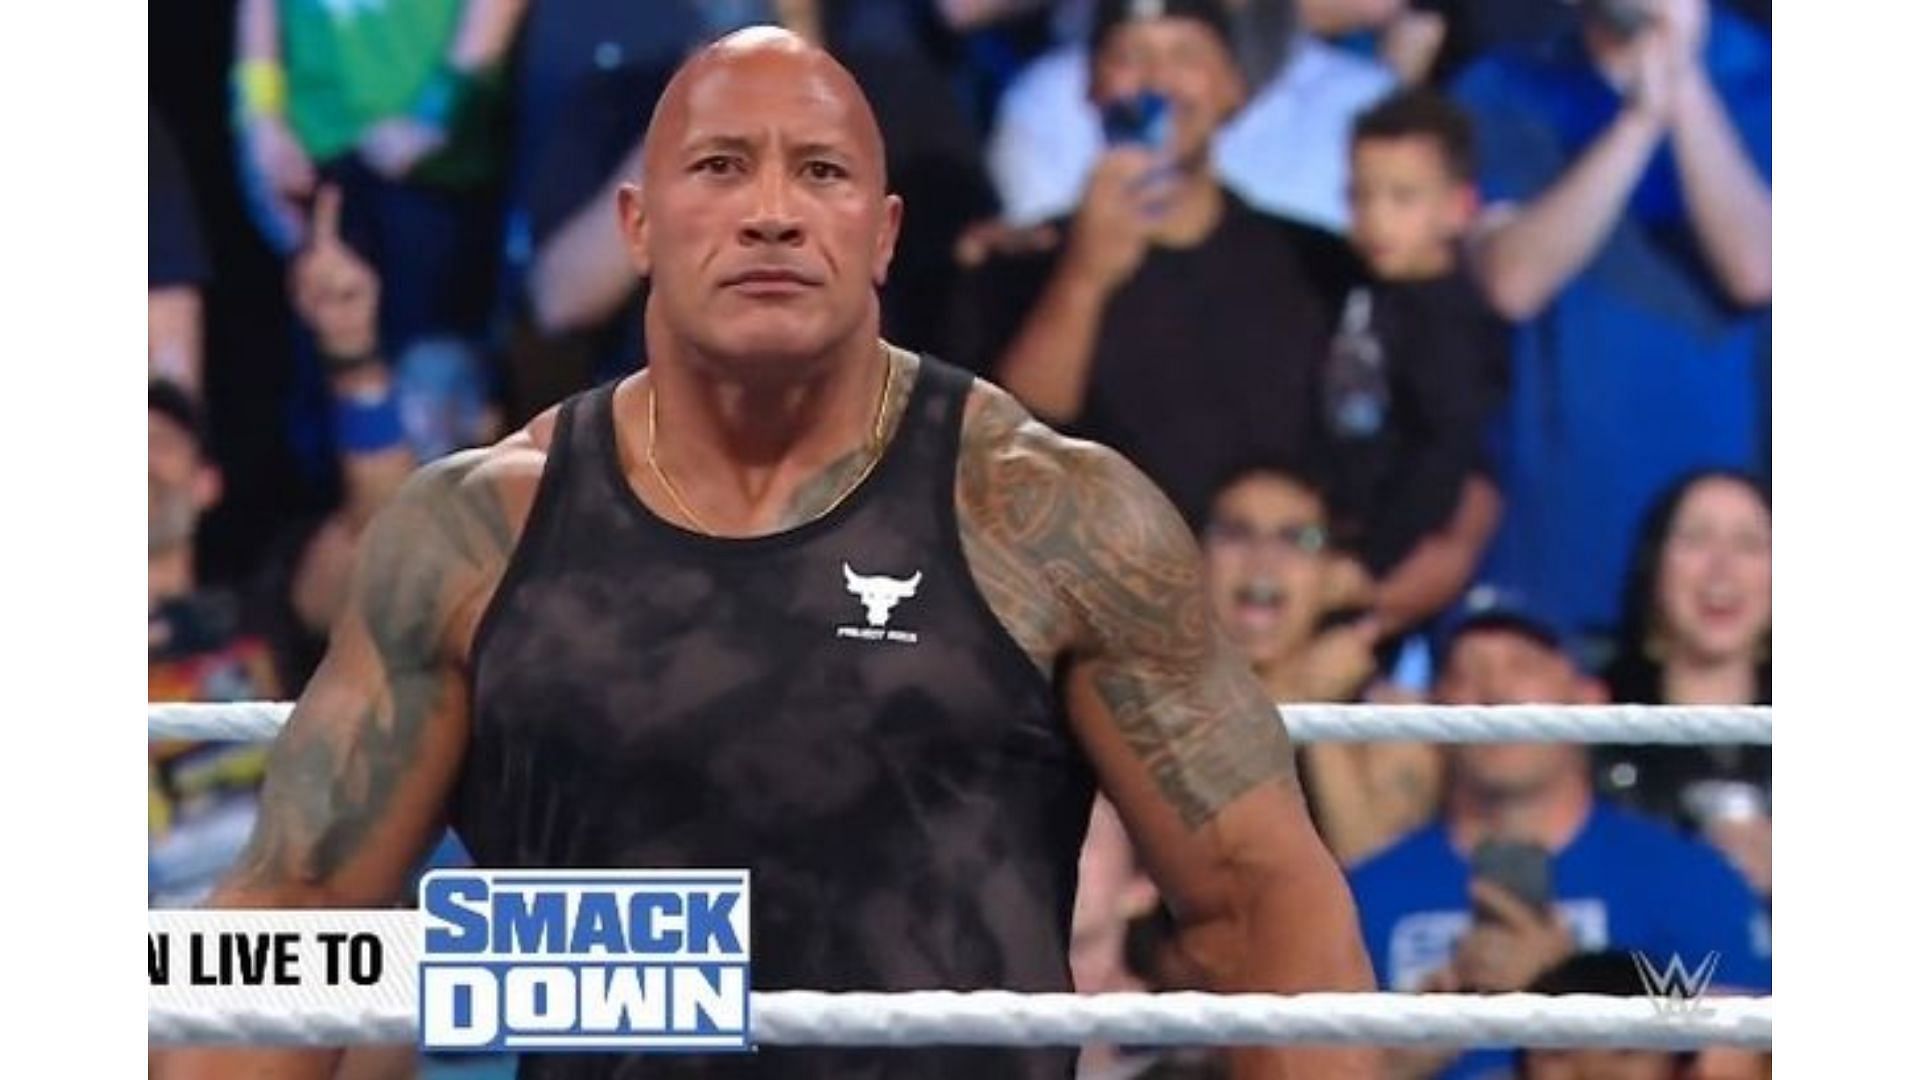 Fans have been speculating what&#039;s next for The Rock